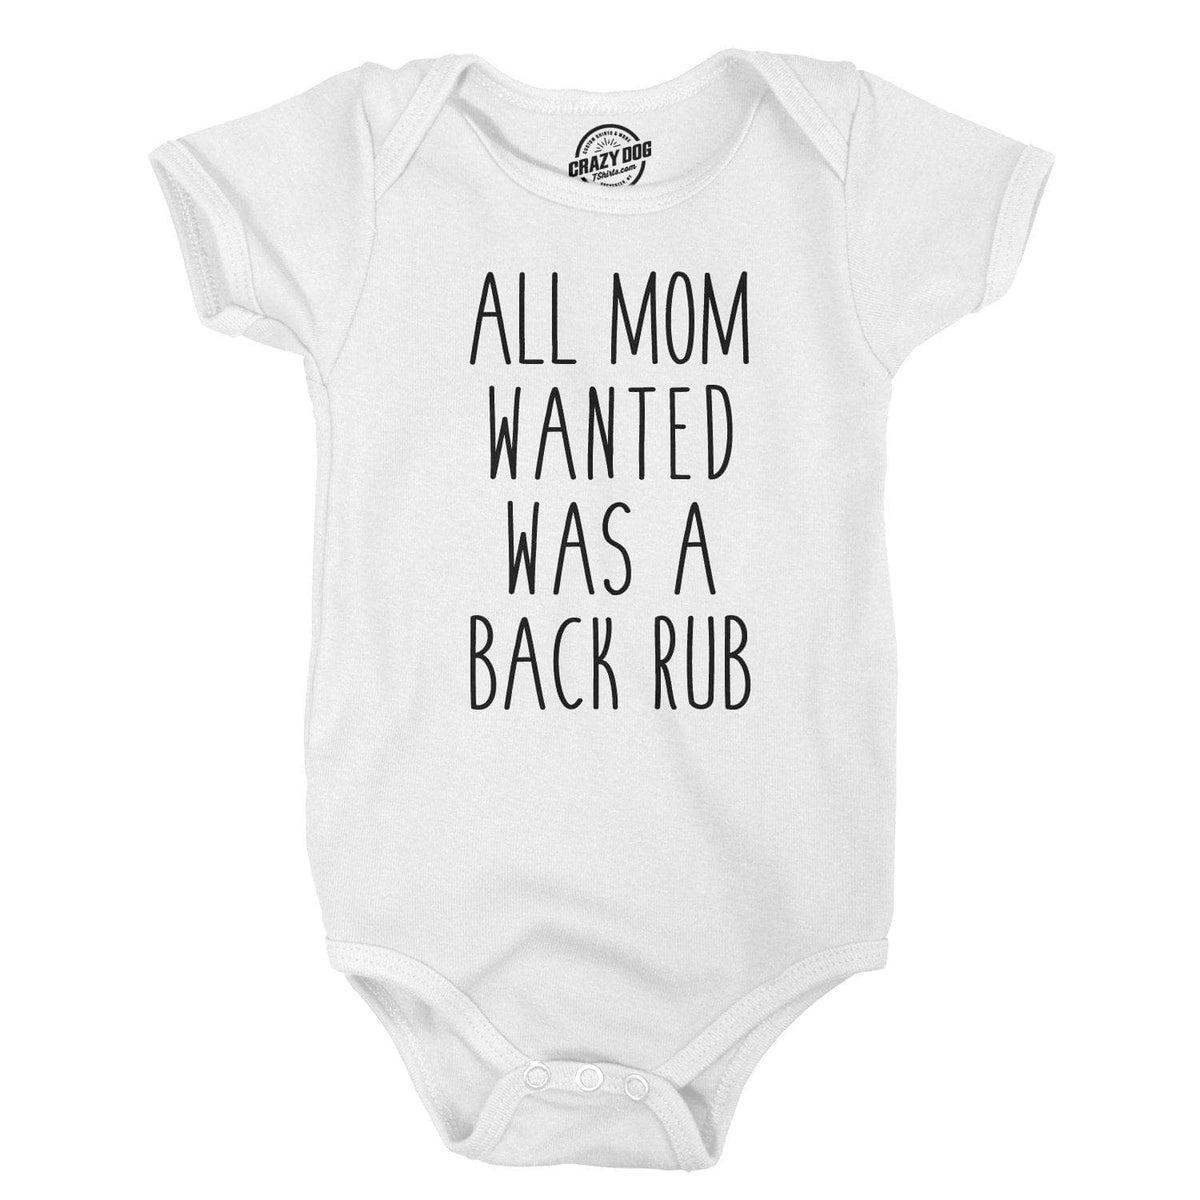 All Mom Wanted Was a Back Rub Baby Bodysuit - Crazy Dog T-Shirts